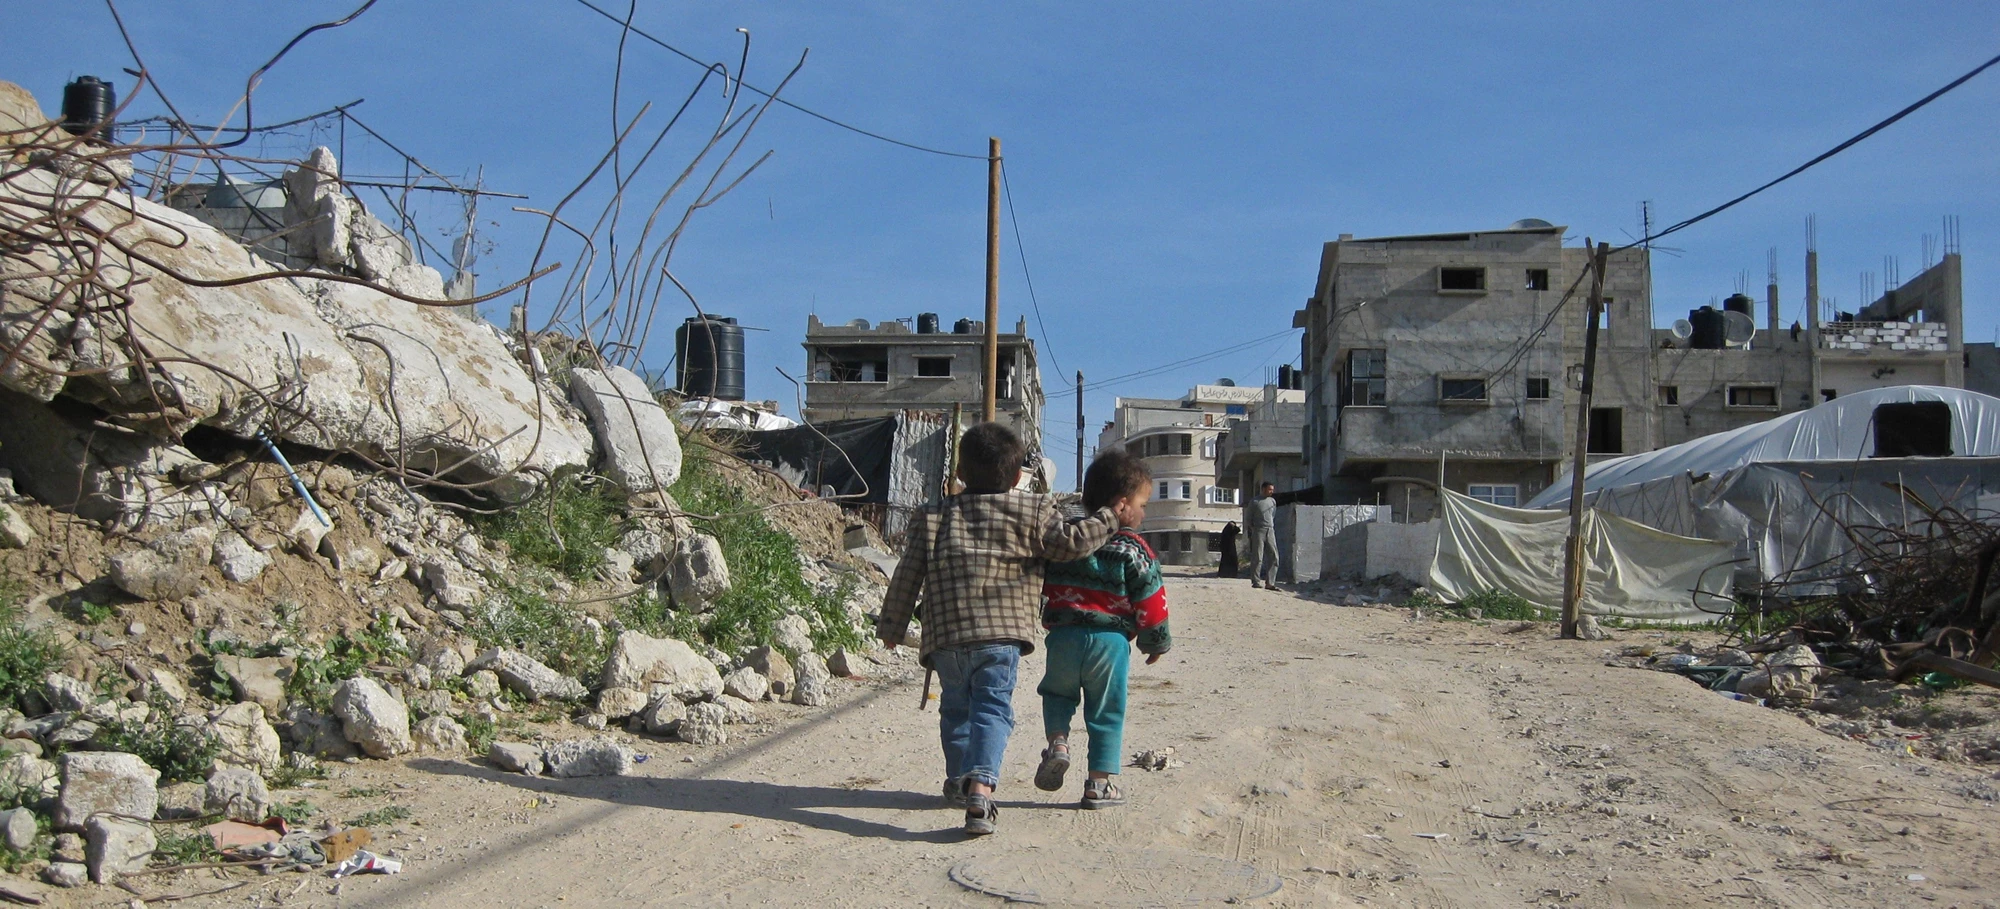 Children walking on a road in Gaza. A new project to improve solid waste management for nearly 1 million people living in Gaza is expected to begin soon.